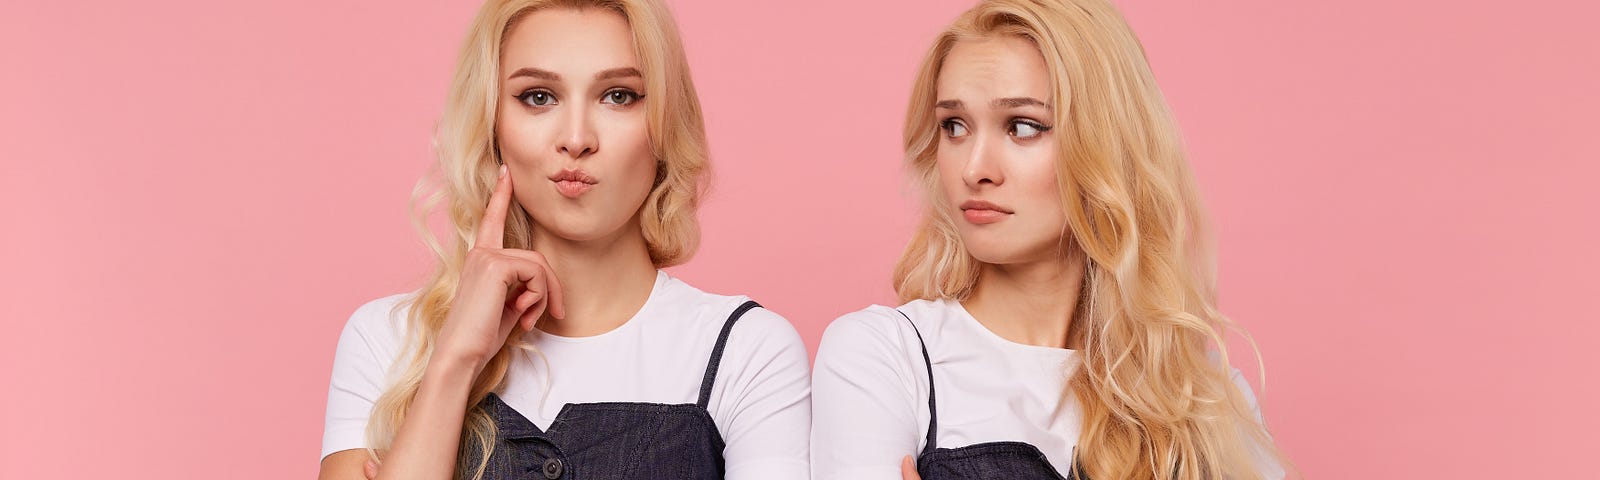 Watch Out, You May Have Two Accounts On Medium. Young brown-eyed long haired female keeping forefinger raised while looking attentively at camera, posing over pink background with her confused pretty blonde sister.